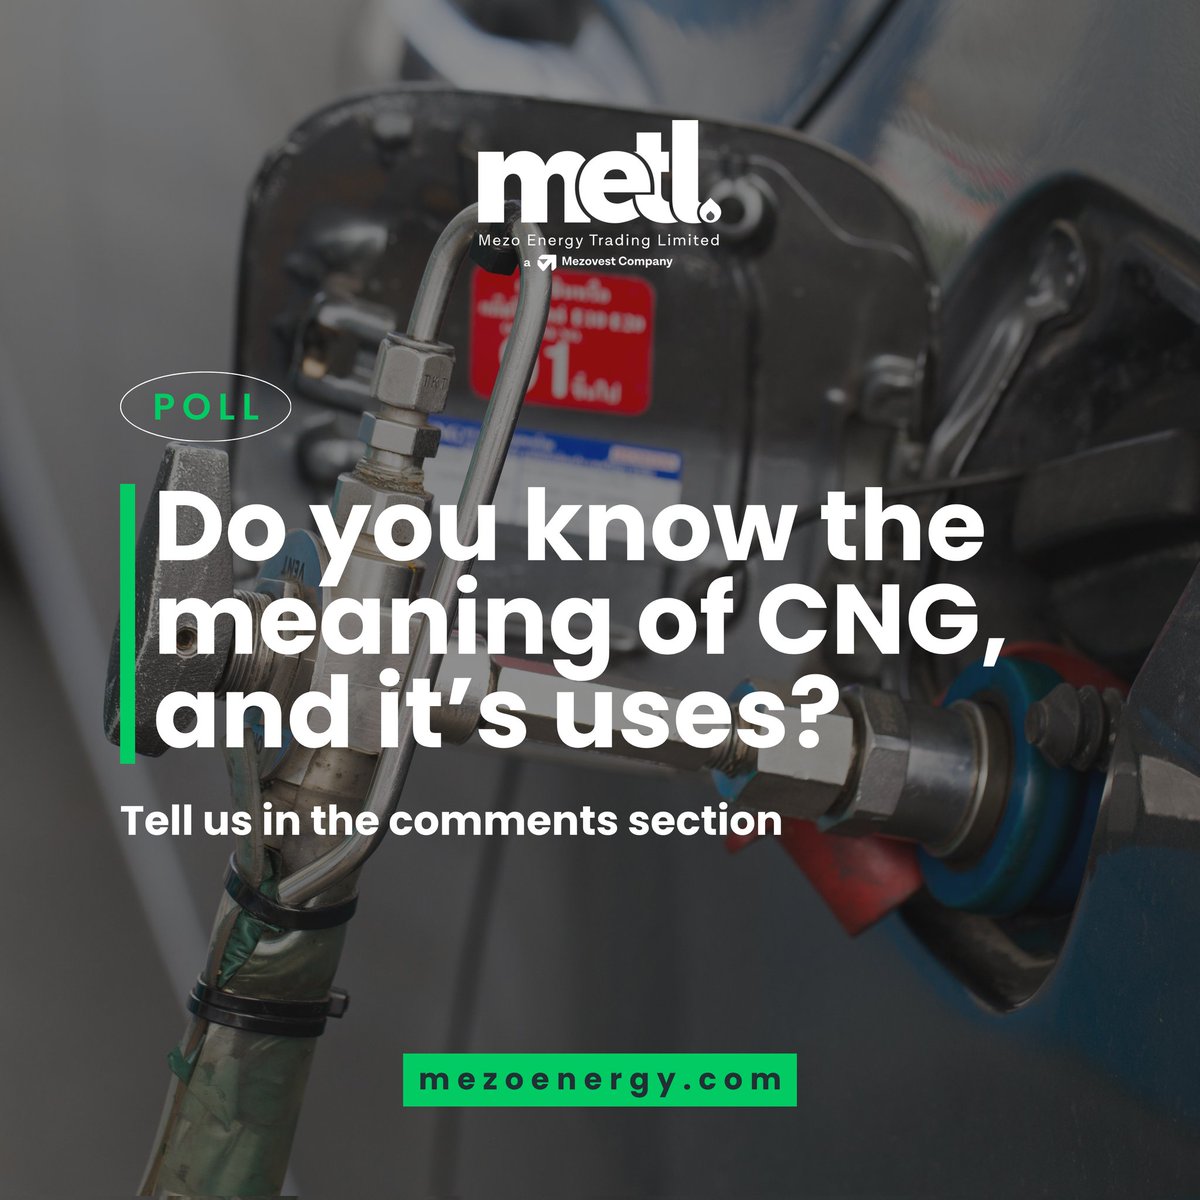 Dear car owners, do you know the meaning of CNG and it's uses?

Tell us in the comment section...

#carowners #JoshuaNgannou
#EternalSunshine
Congratulations AJ Access Bank Staged